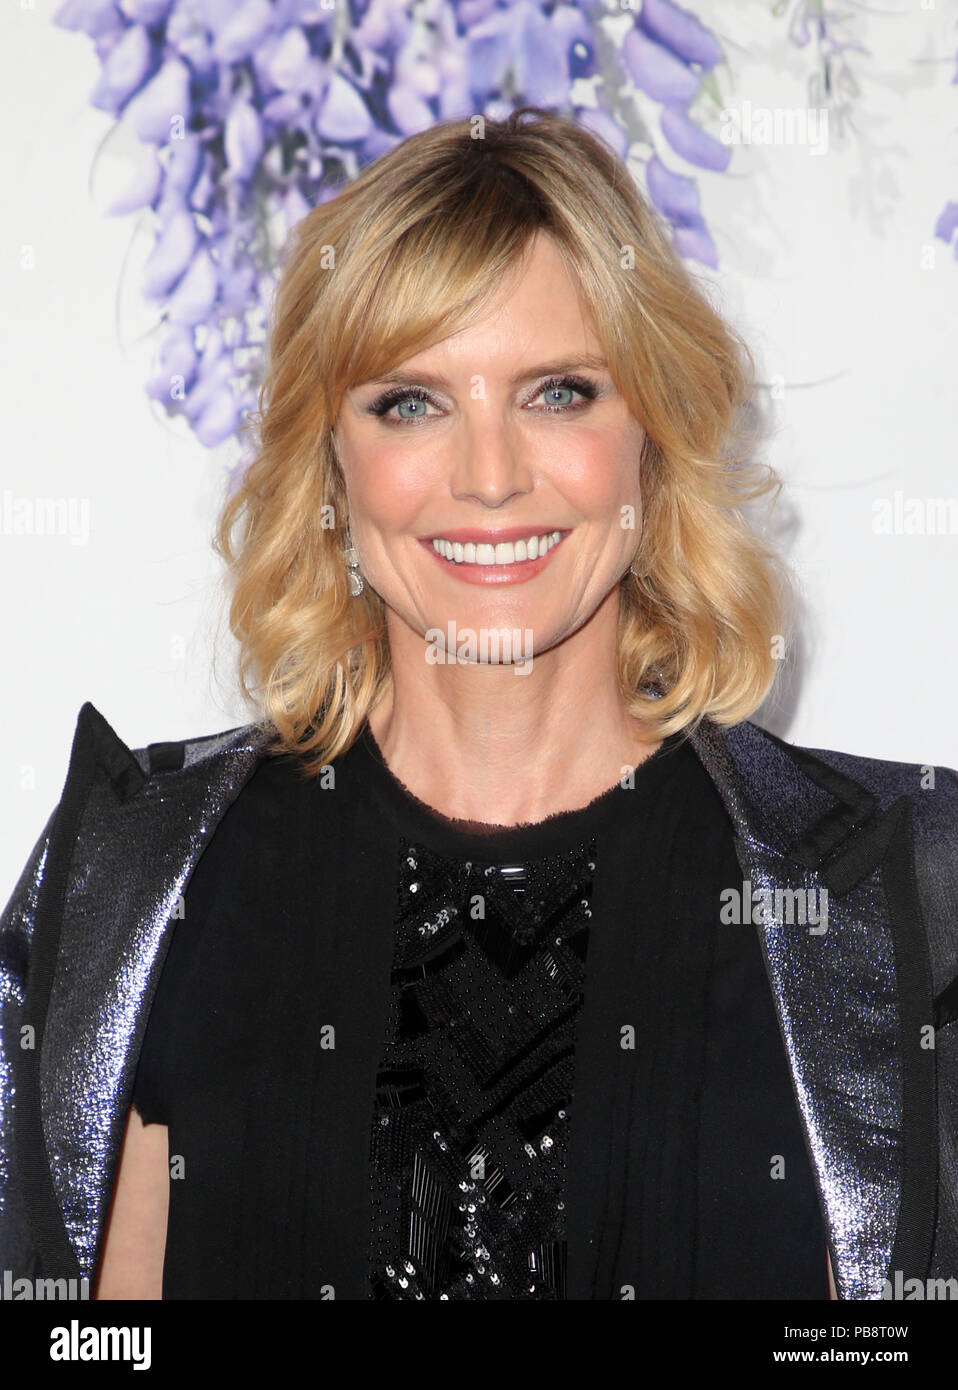 Beverly Hills, Ca. 26th July, 2018. Courtney Thorne-Smith, at the Hallmark Channel Summer 2018 TCA Press Tour Event in Beverly Hills, California on July 26, 2018. Credit: MediaPunch Inc/Alamy Live News Stock Photo